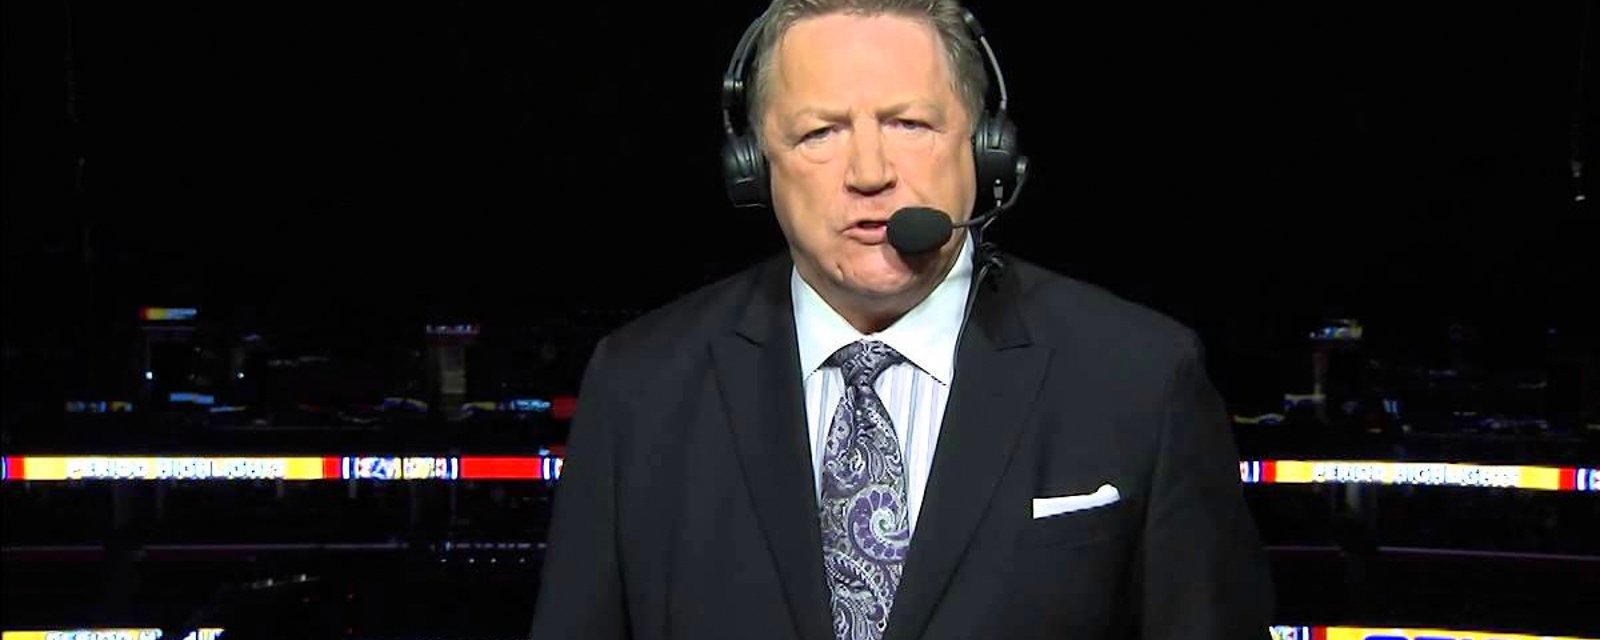 NHL Hall of Famer and legendary broadcaster announces his retirement